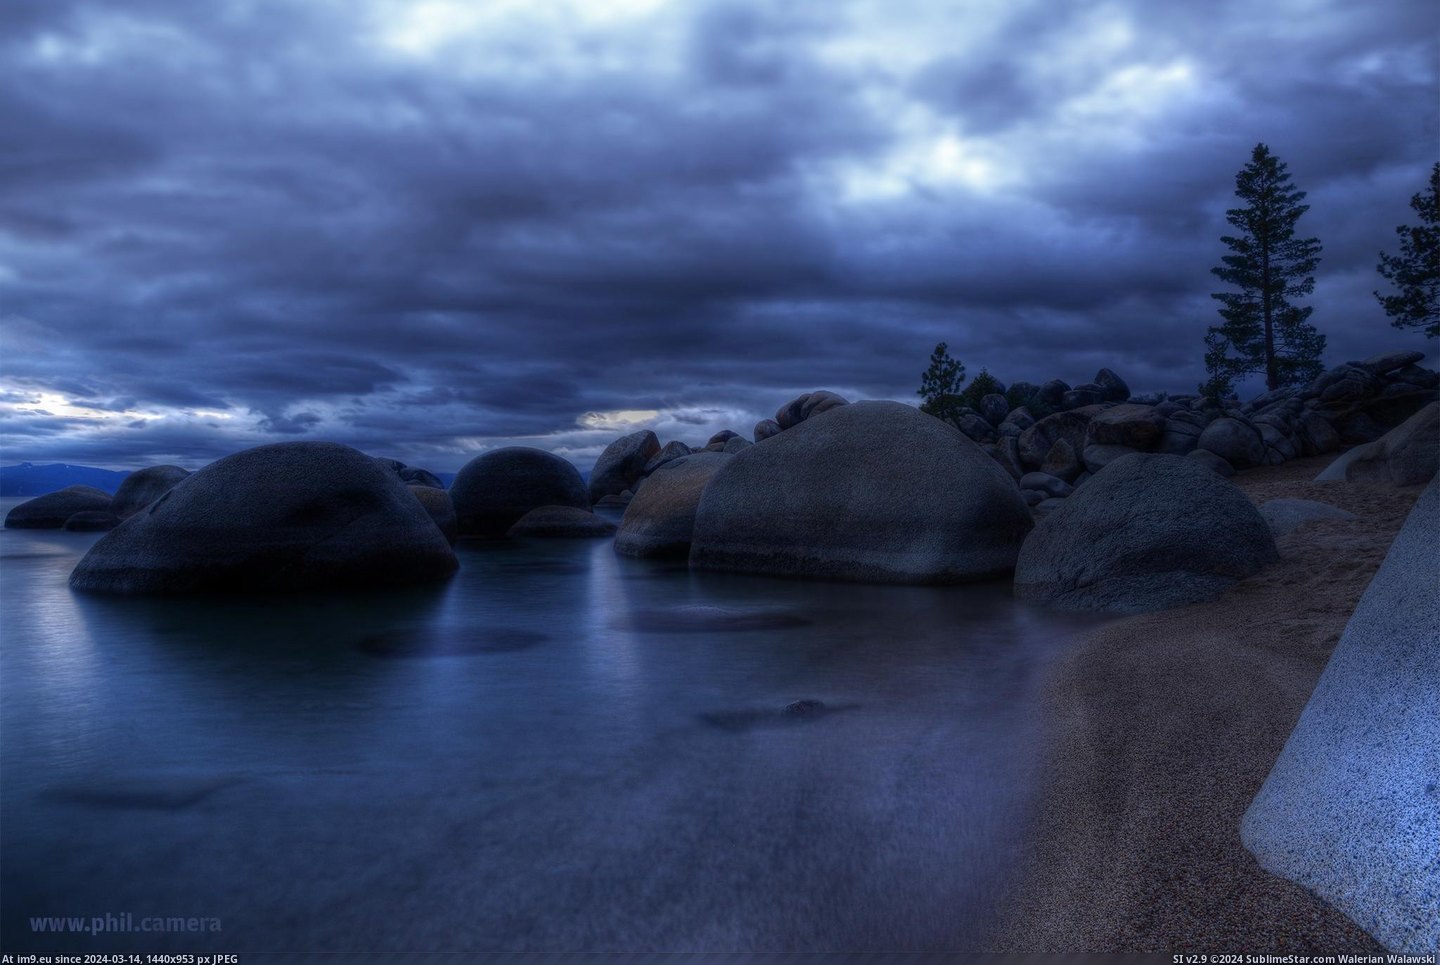 #Lake #Water #East #Skies #2048x1367 #Tahoe #Surreal #Shore [Earthporn] Stilled Water and Surreal Skies over east shore, Lake Tahoe, last weeked [oc][2048x1367] Pic. (Bild von album My r/EARTHPORN favs))